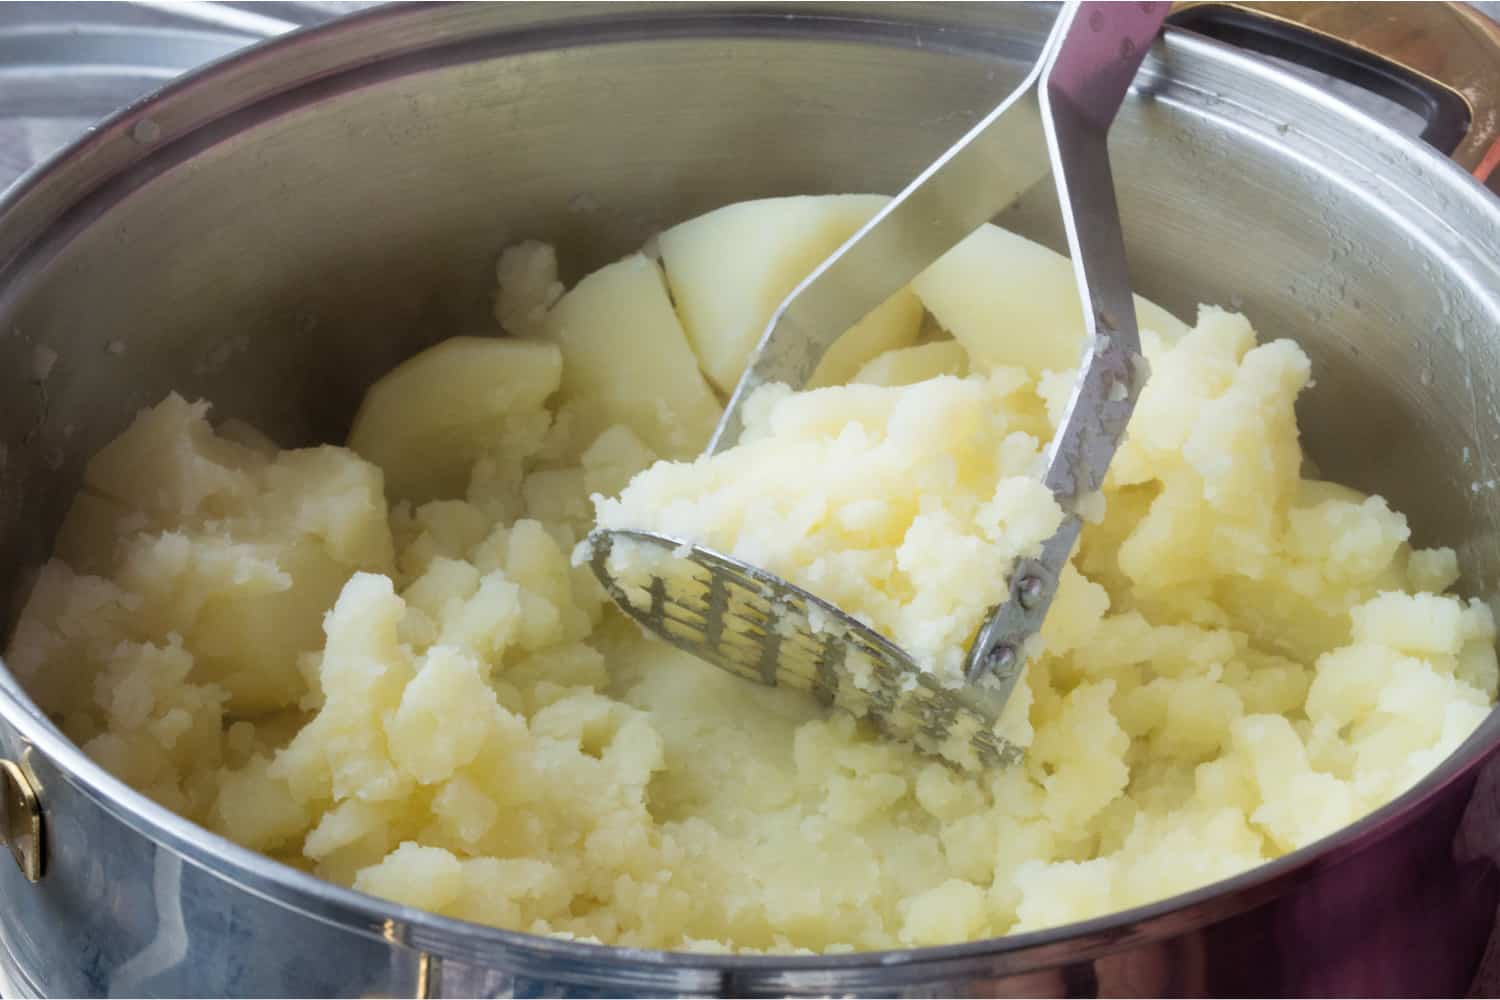 Close up image of a silver pan of mashed potato